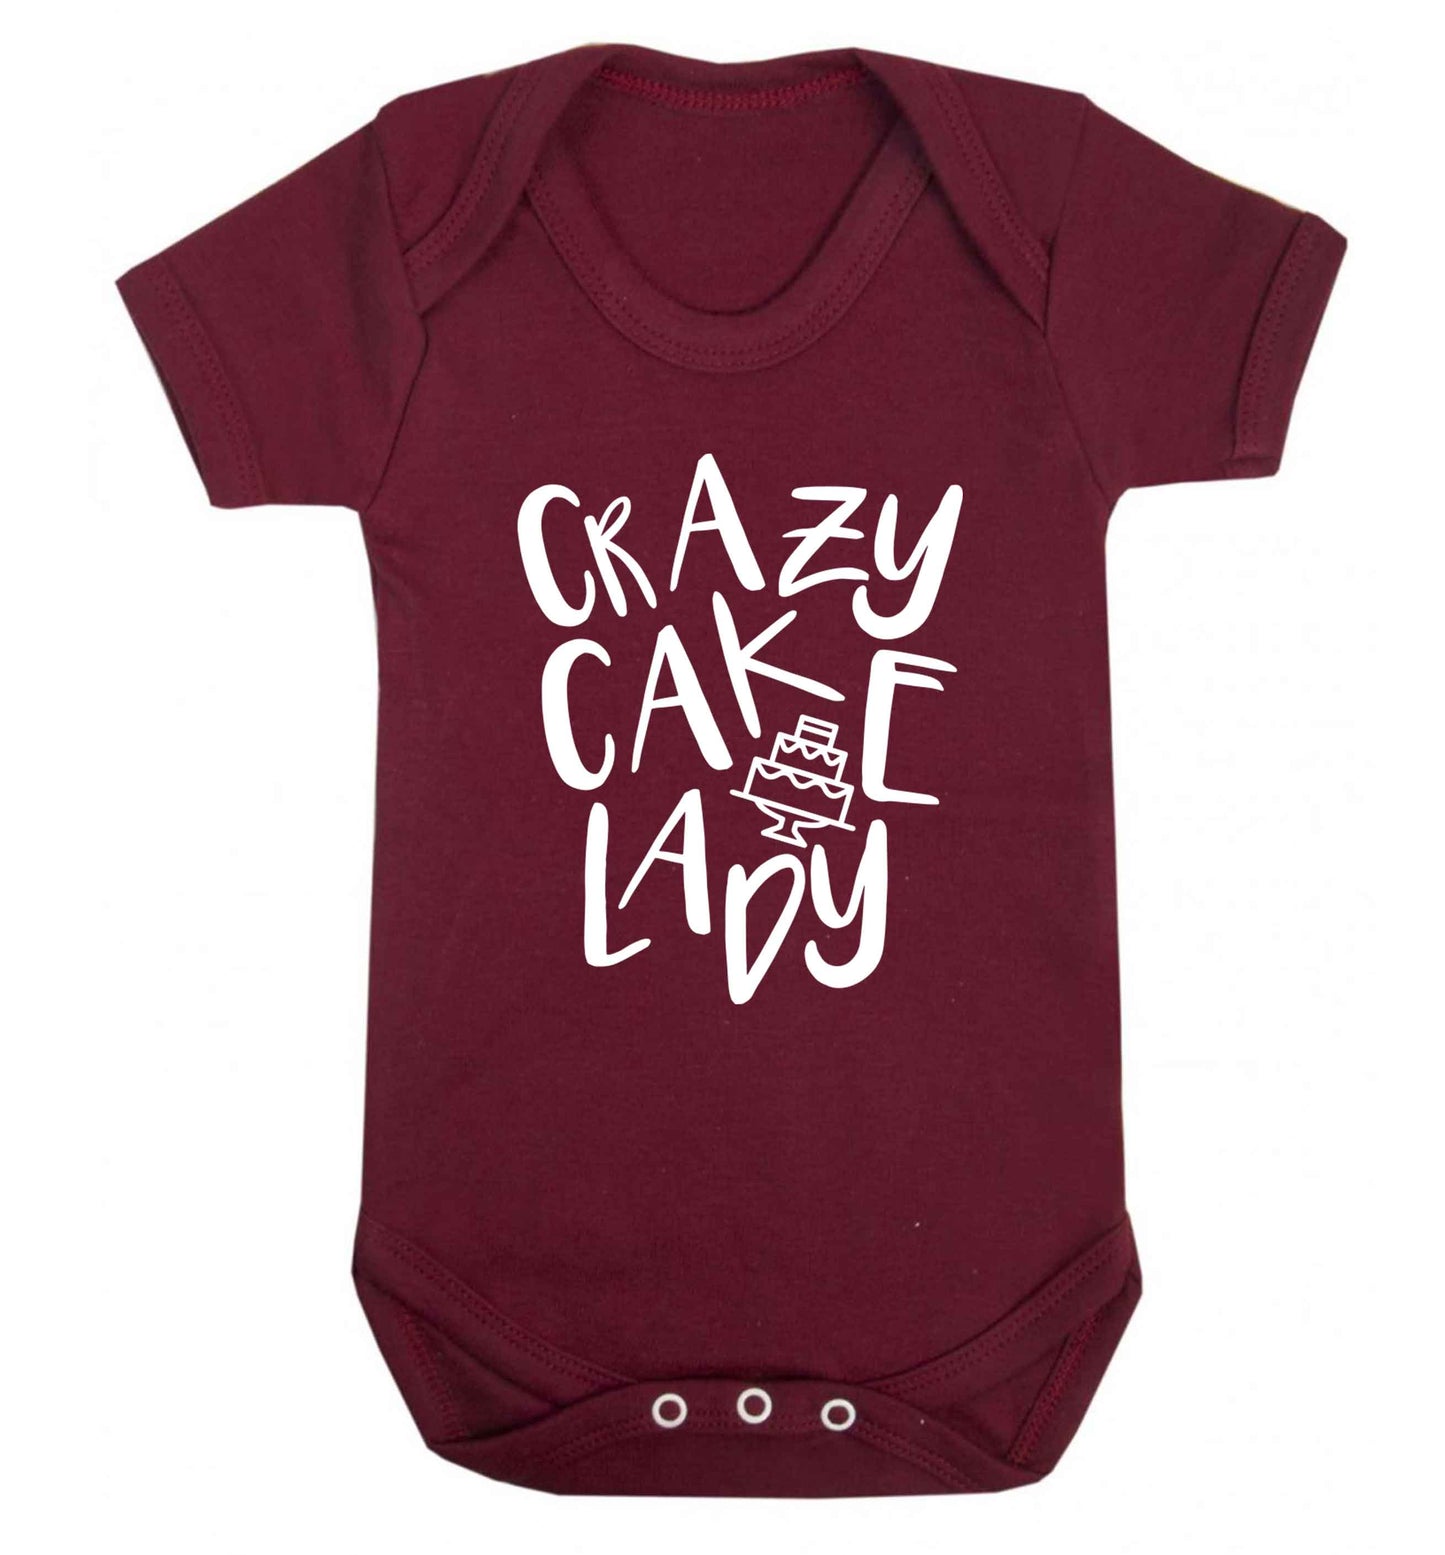 Crazy cake lady Baby Vest maroon 18-24 months